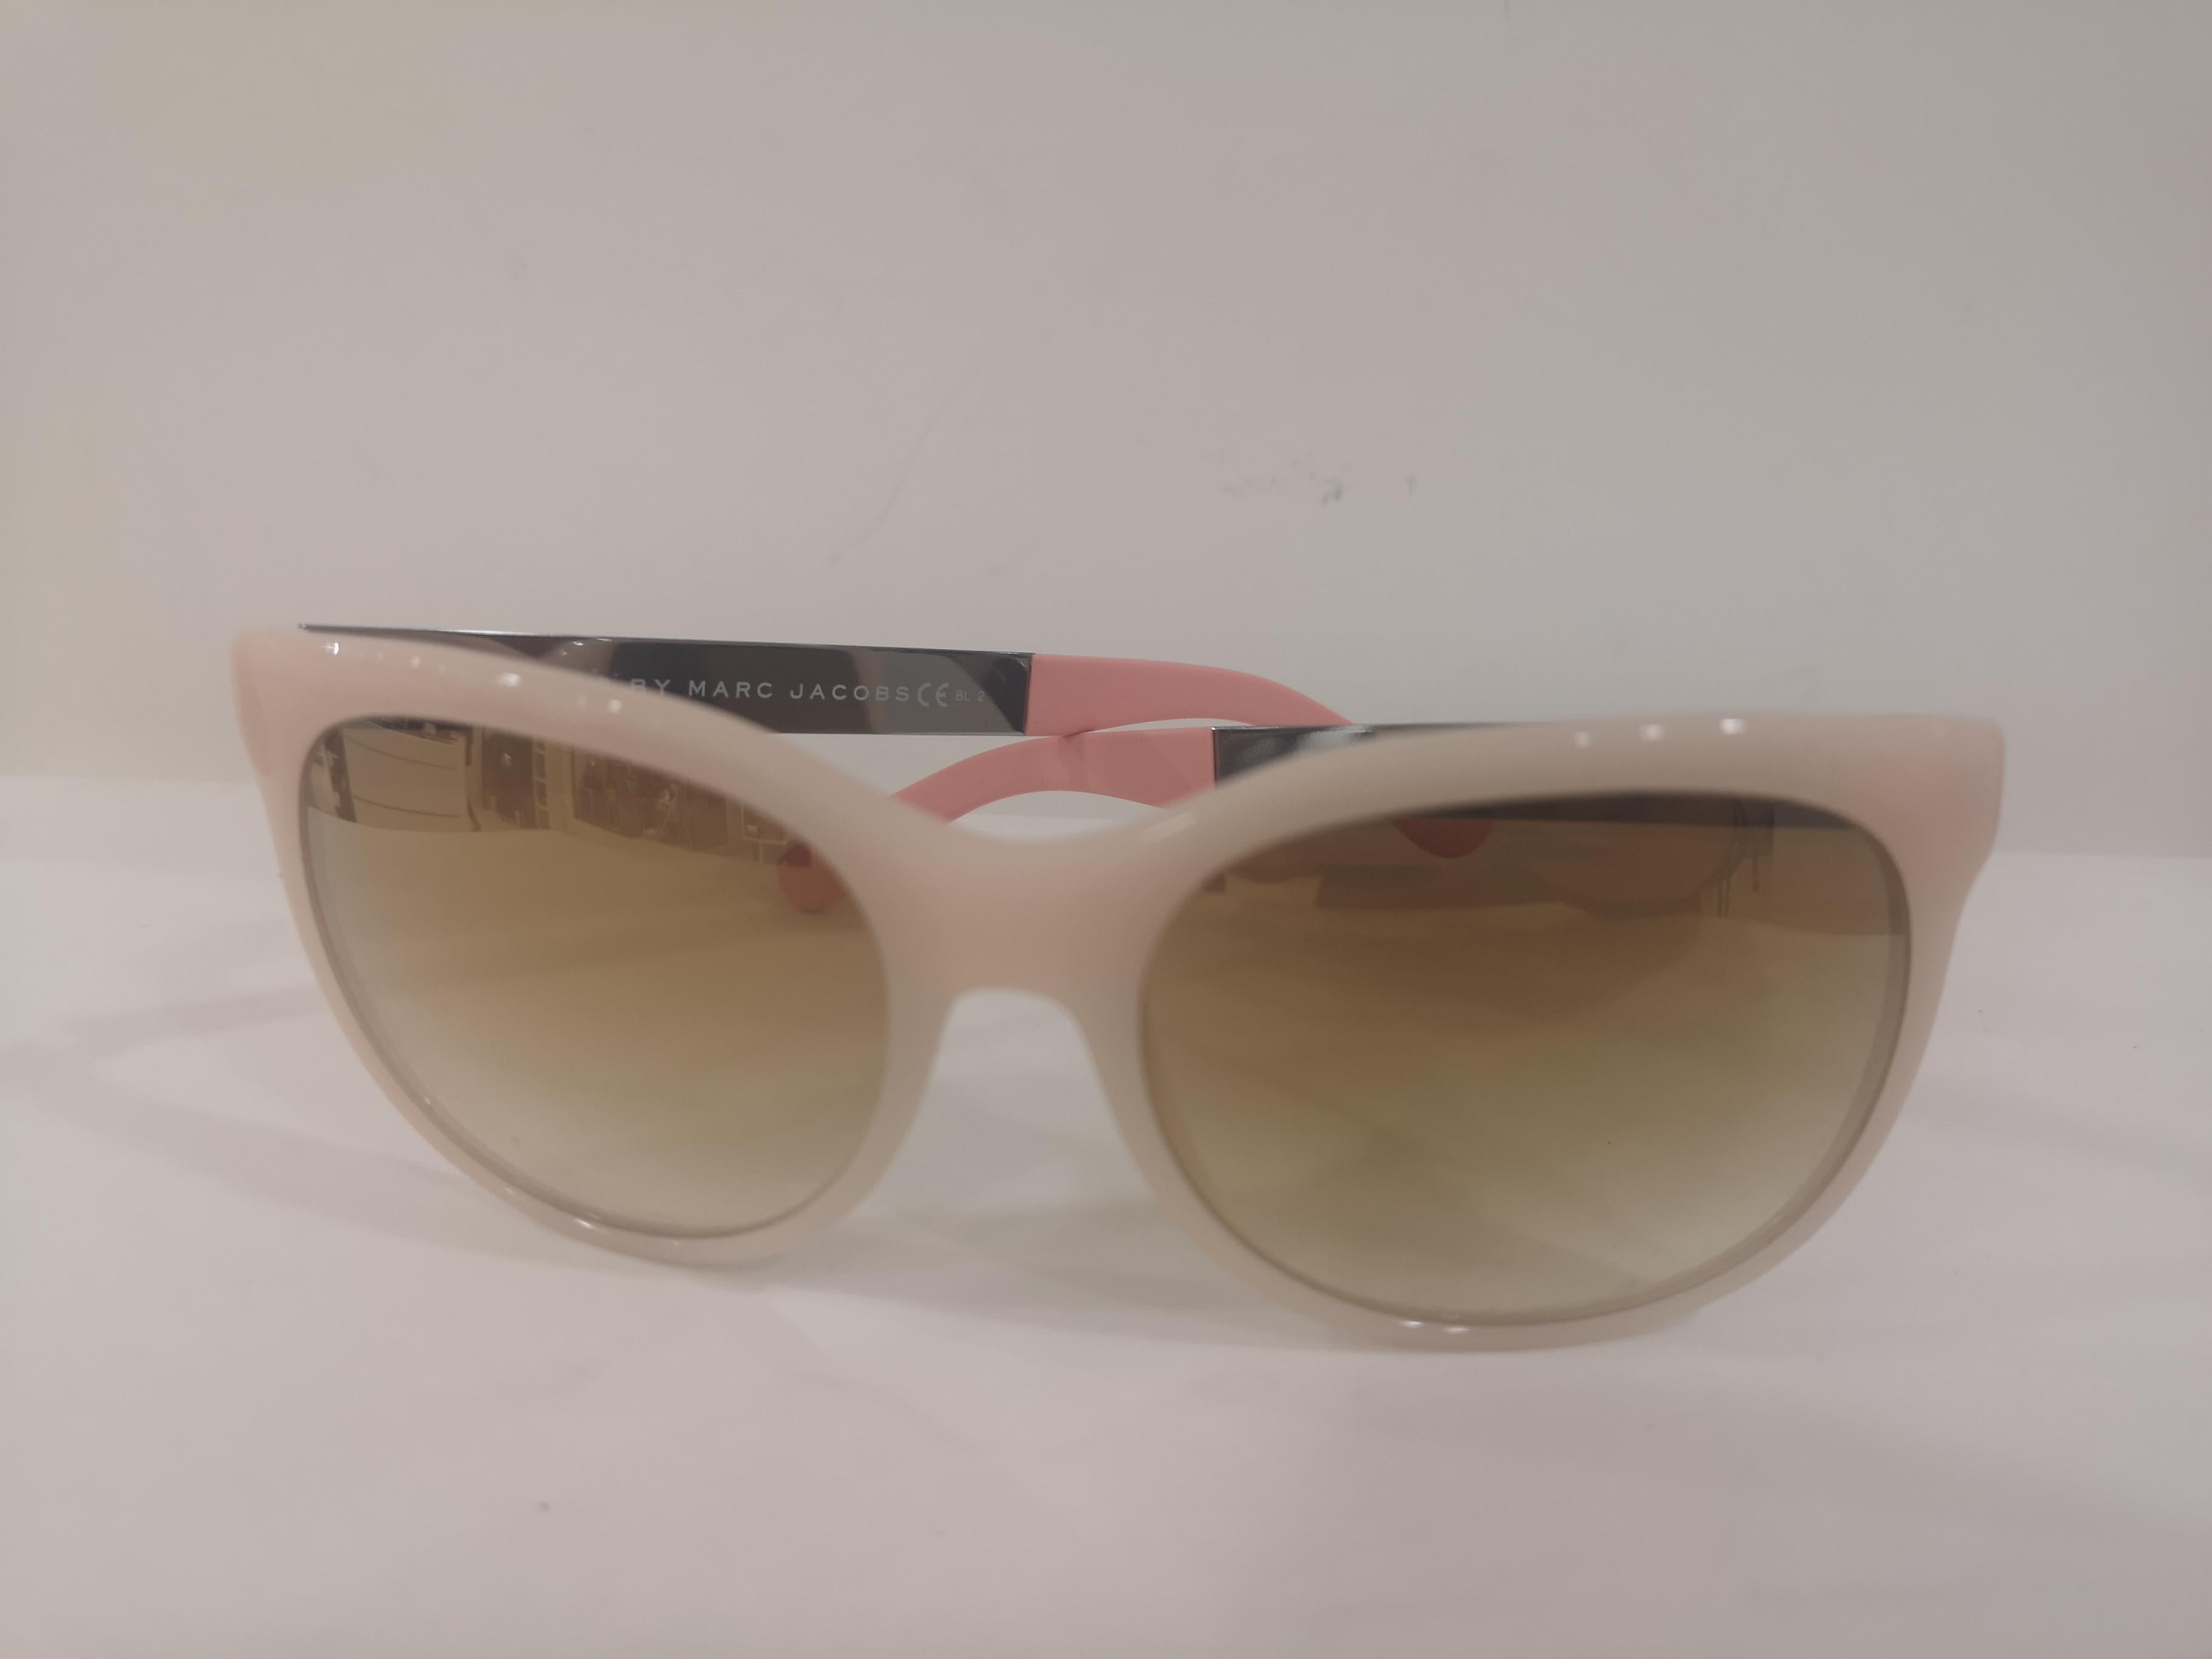 Marc by Marc Jacobs Pfirsich rosa Sonnenbrille NWOT im Angebot 2